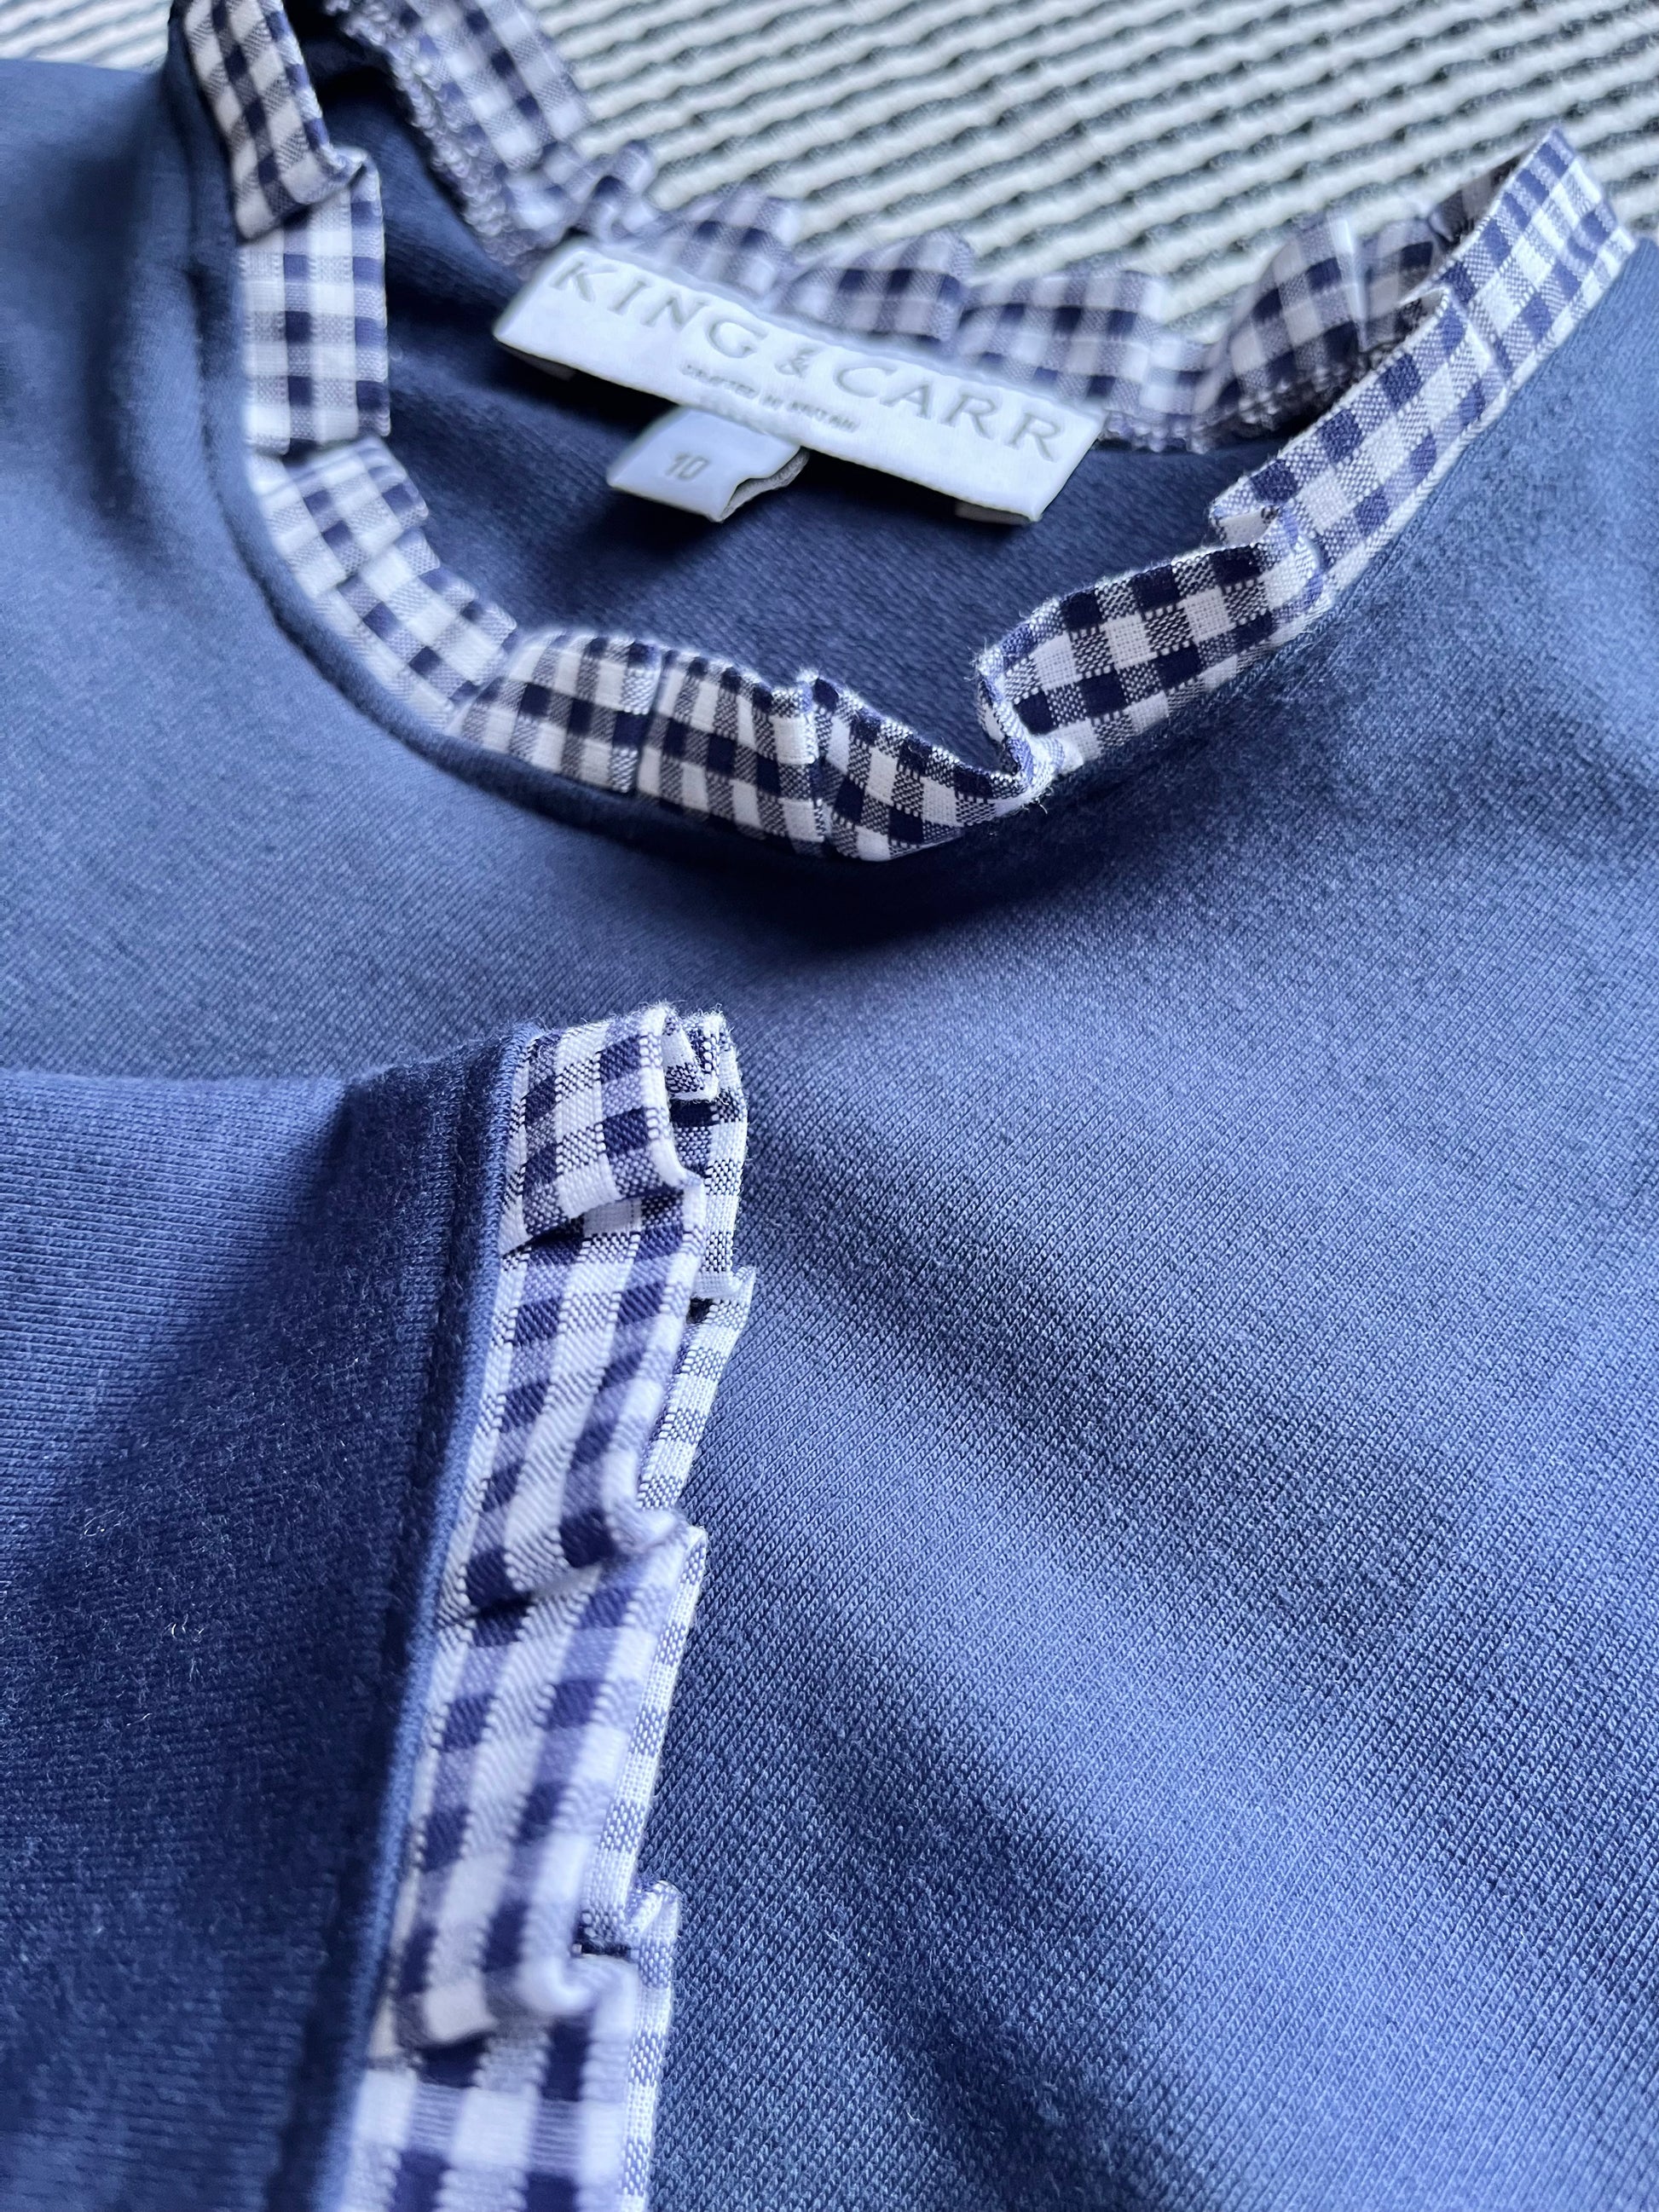 Navy Rudford Top close up detail product image